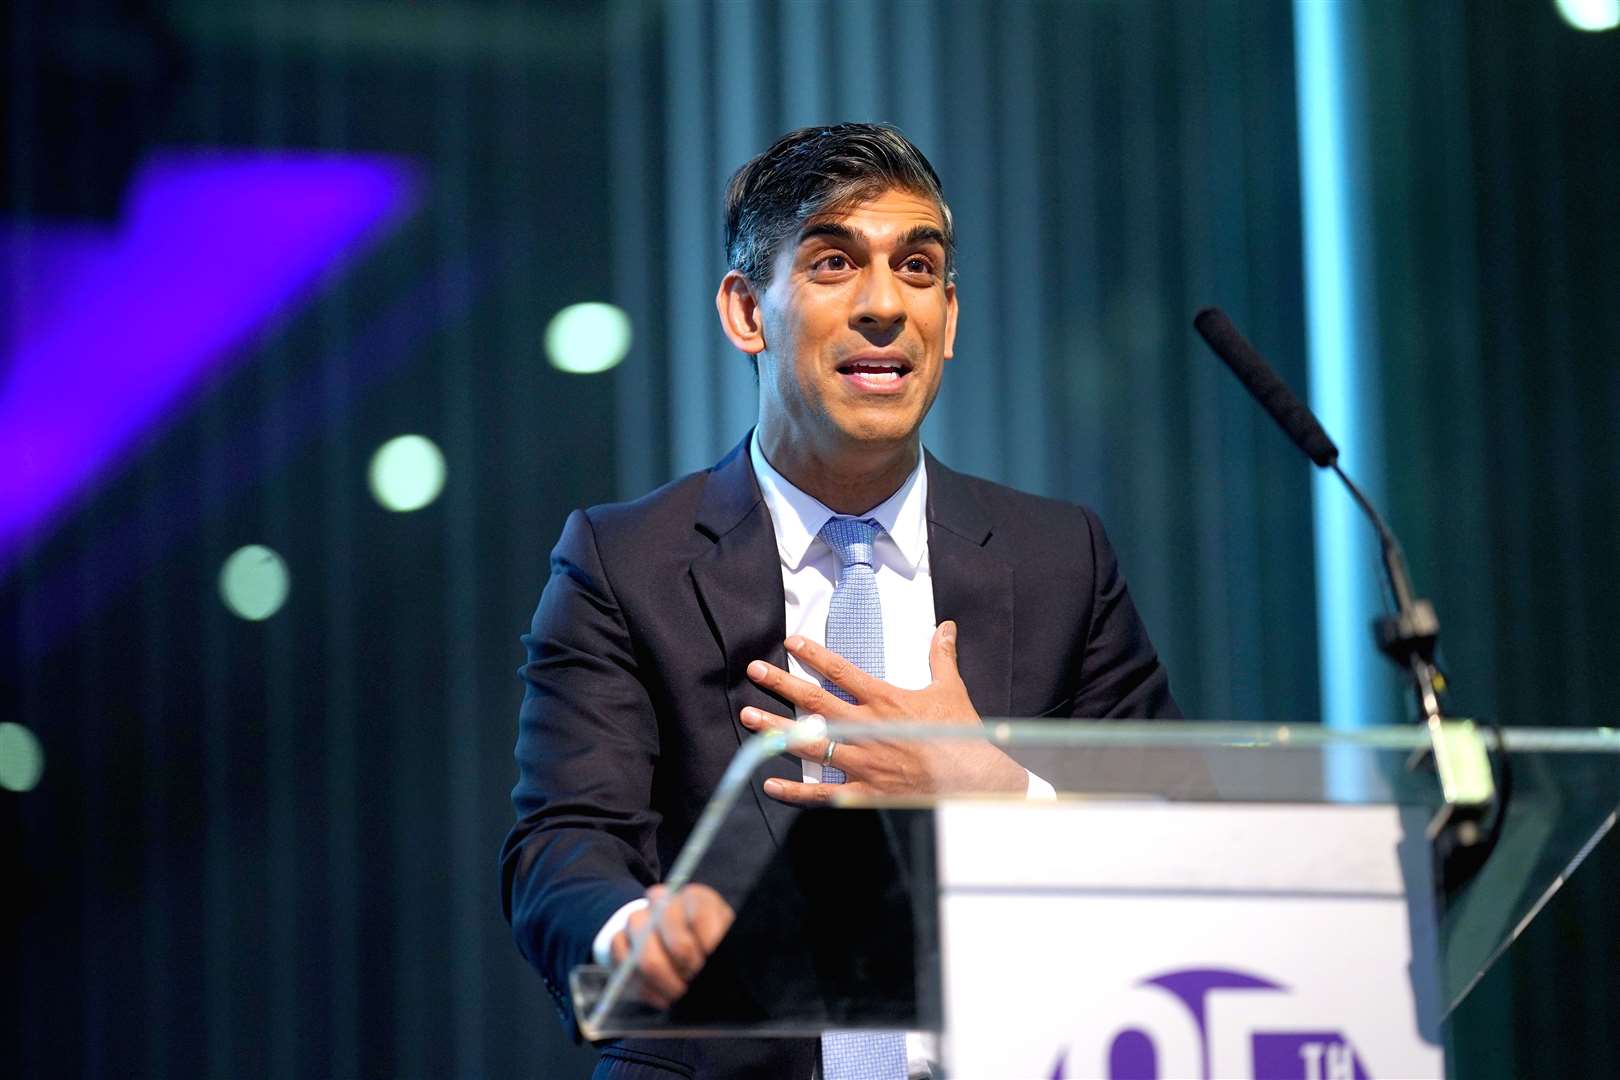 Polling on who would make the best prime minister shows Rishi Sunak is at 18% (Yui Mok/PA)